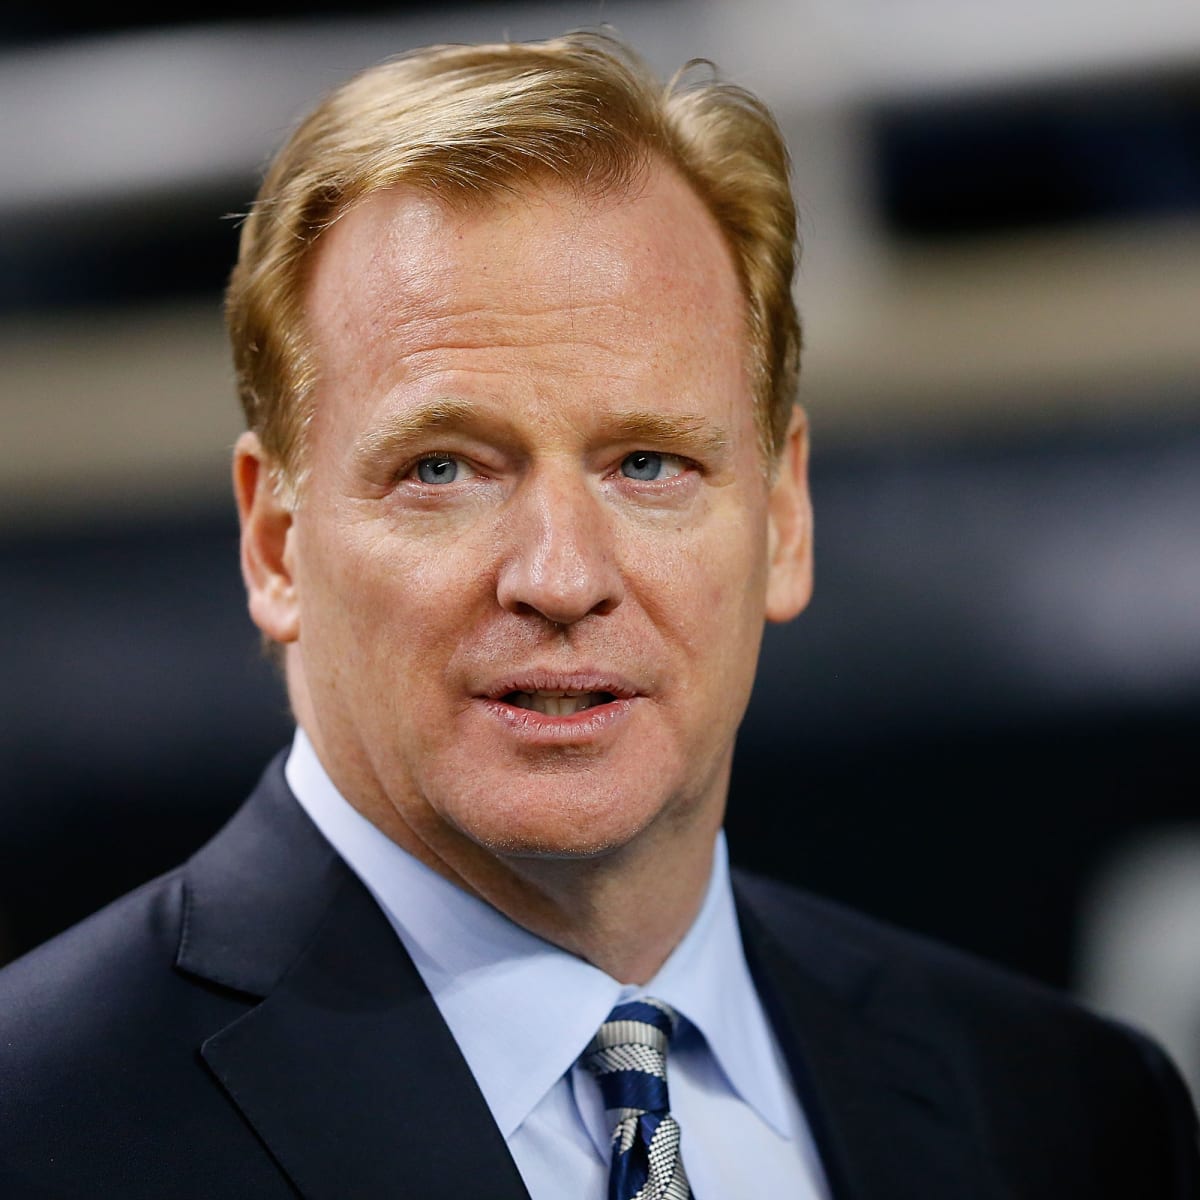 Janay Rice tells 'Today' show: Goodell not honest